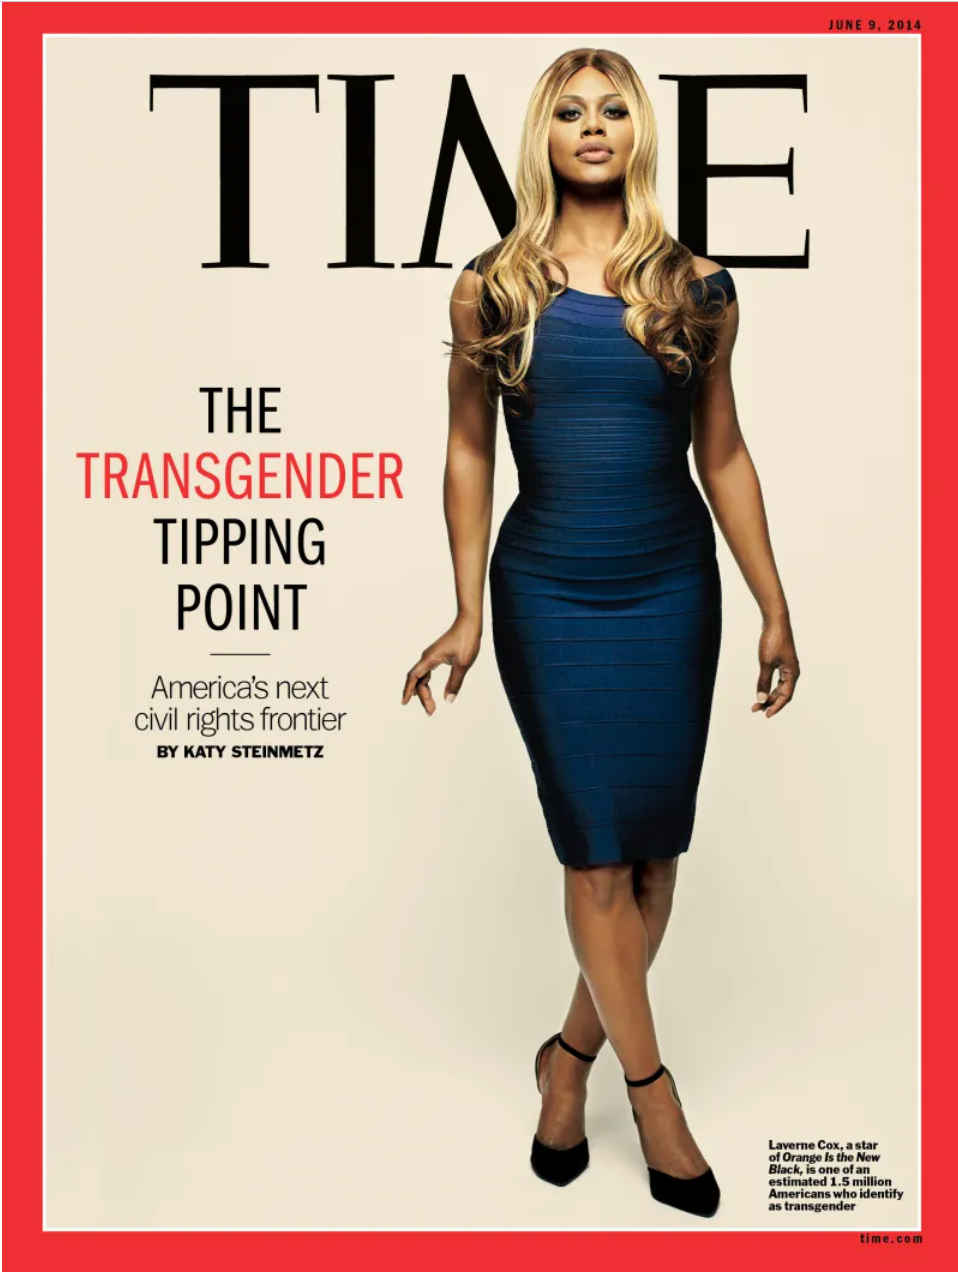 The cover of Time Magazine, June 9, 2014, showing aphoto of Laverne Cox, Star of Orange is the New Black, with the title of the article in that issue, The Transgender Tipping Point, and the subtitle, America’s Next Civil Rights Frontier.